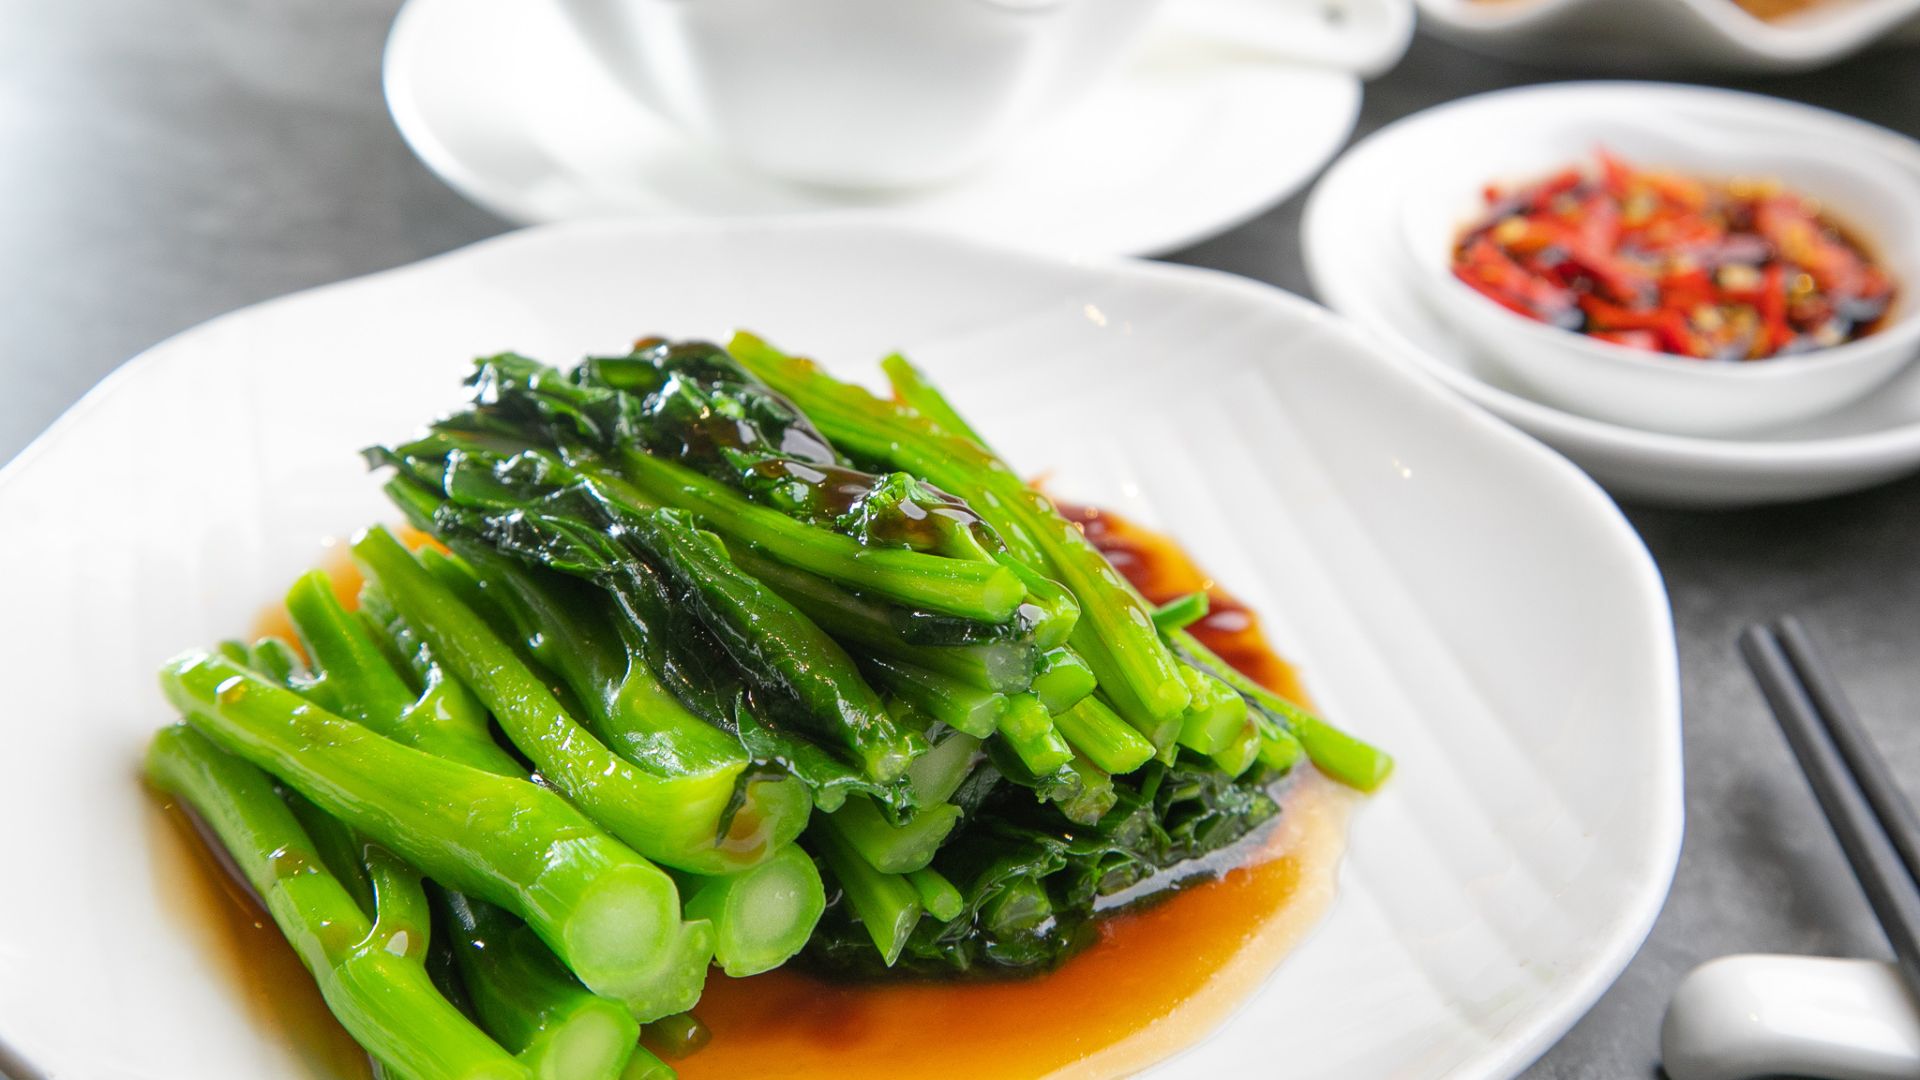 Chinese broccoli displayed on a white plate with another dish out of focus